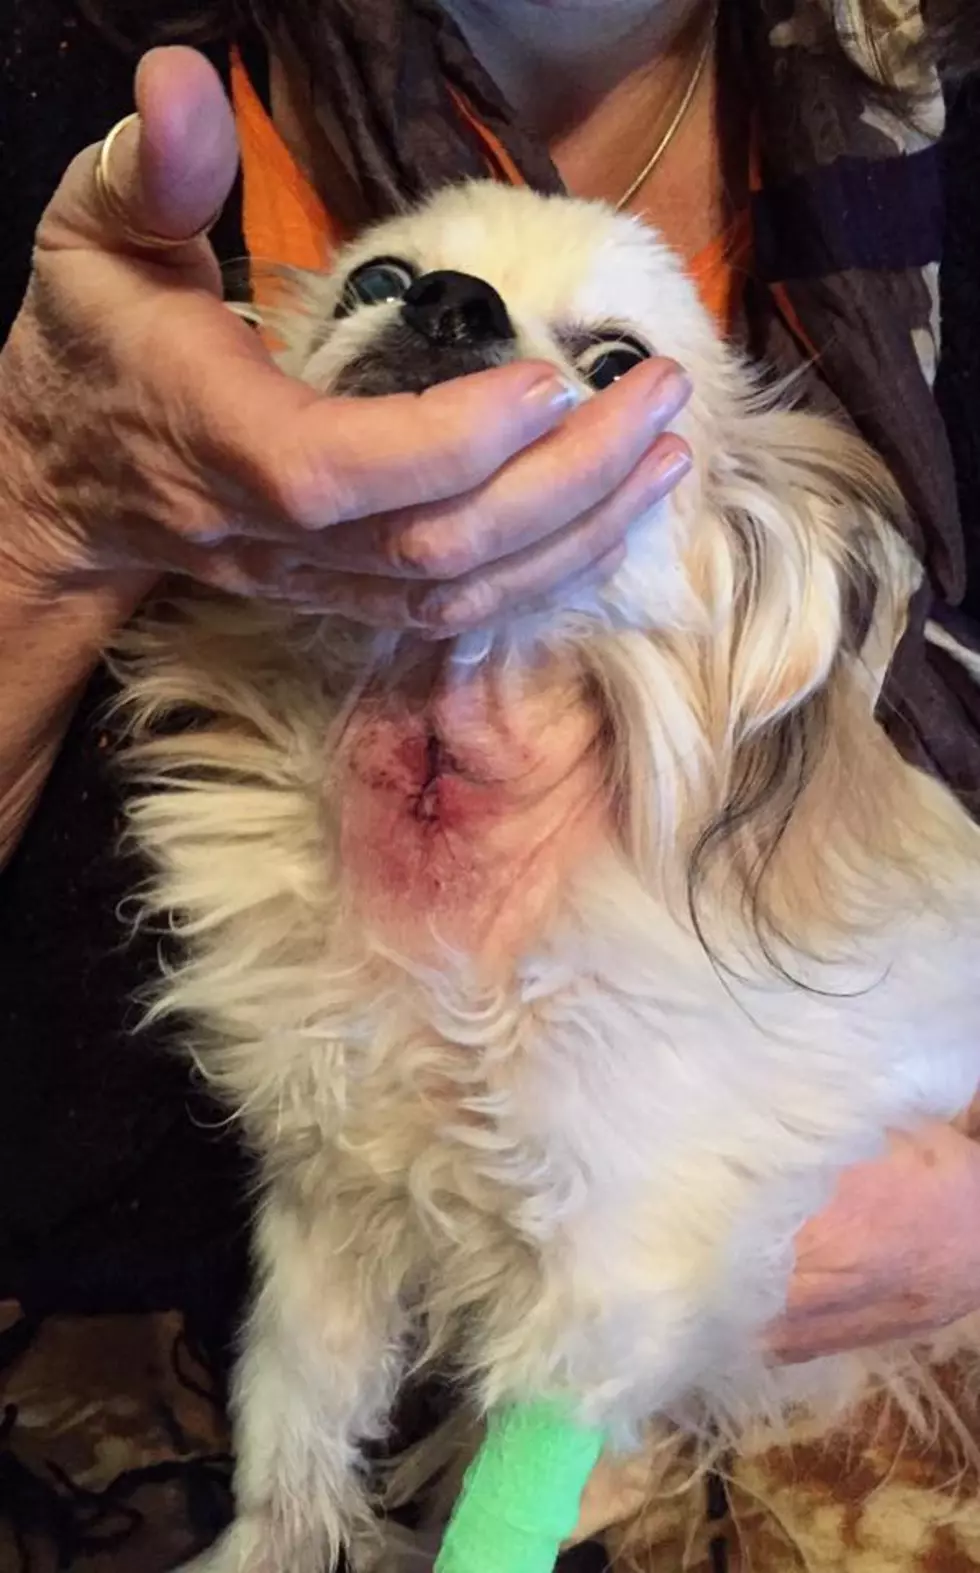 Holiday Table Scraps Almost Killed My Friend’s Dog